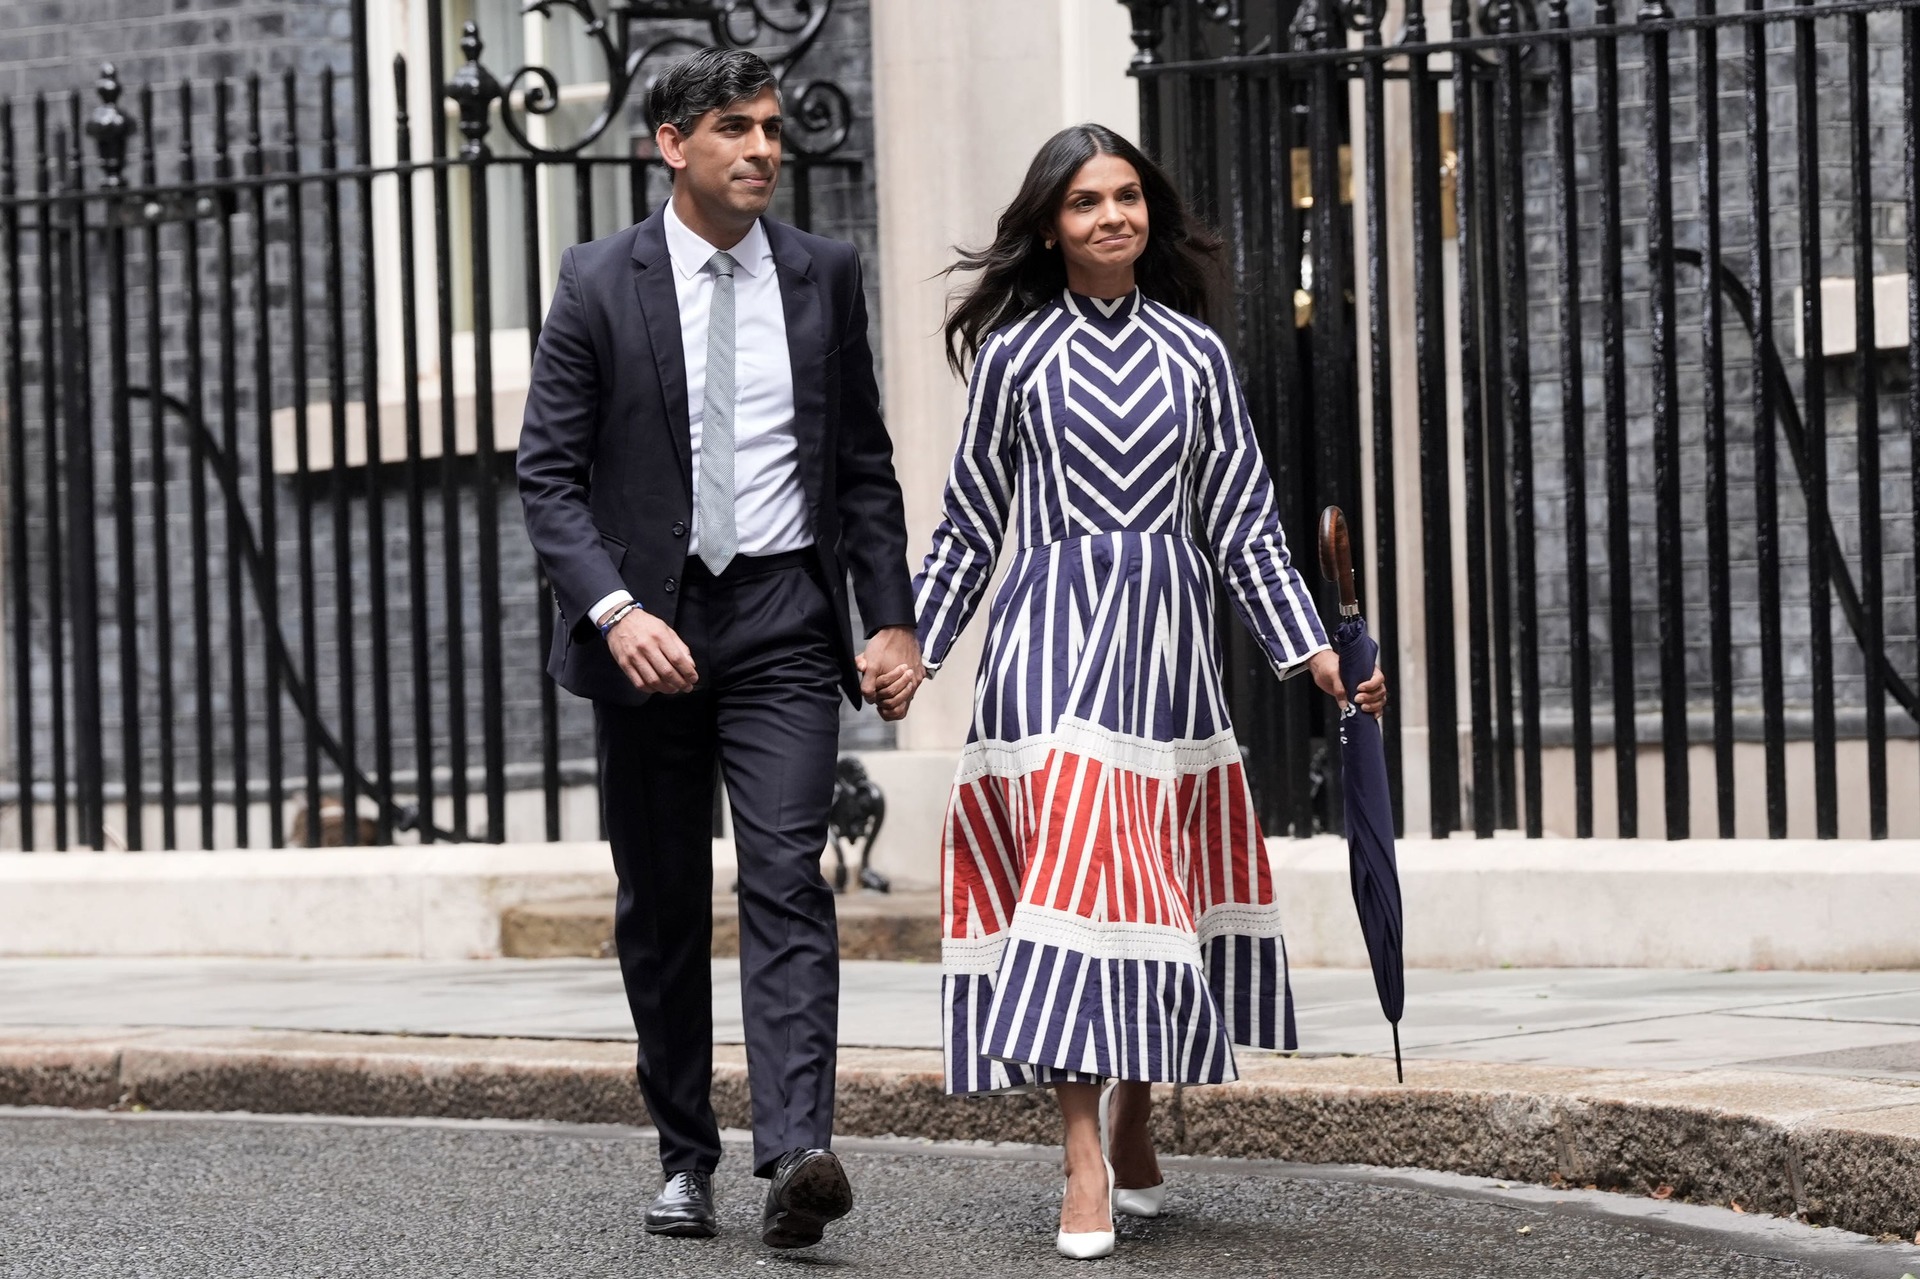 Outgoing Conservative prime minister Rishi Sunak with his wife Akshata Murty leave 10 Downing Street (Stefan Rousseau/PA) 